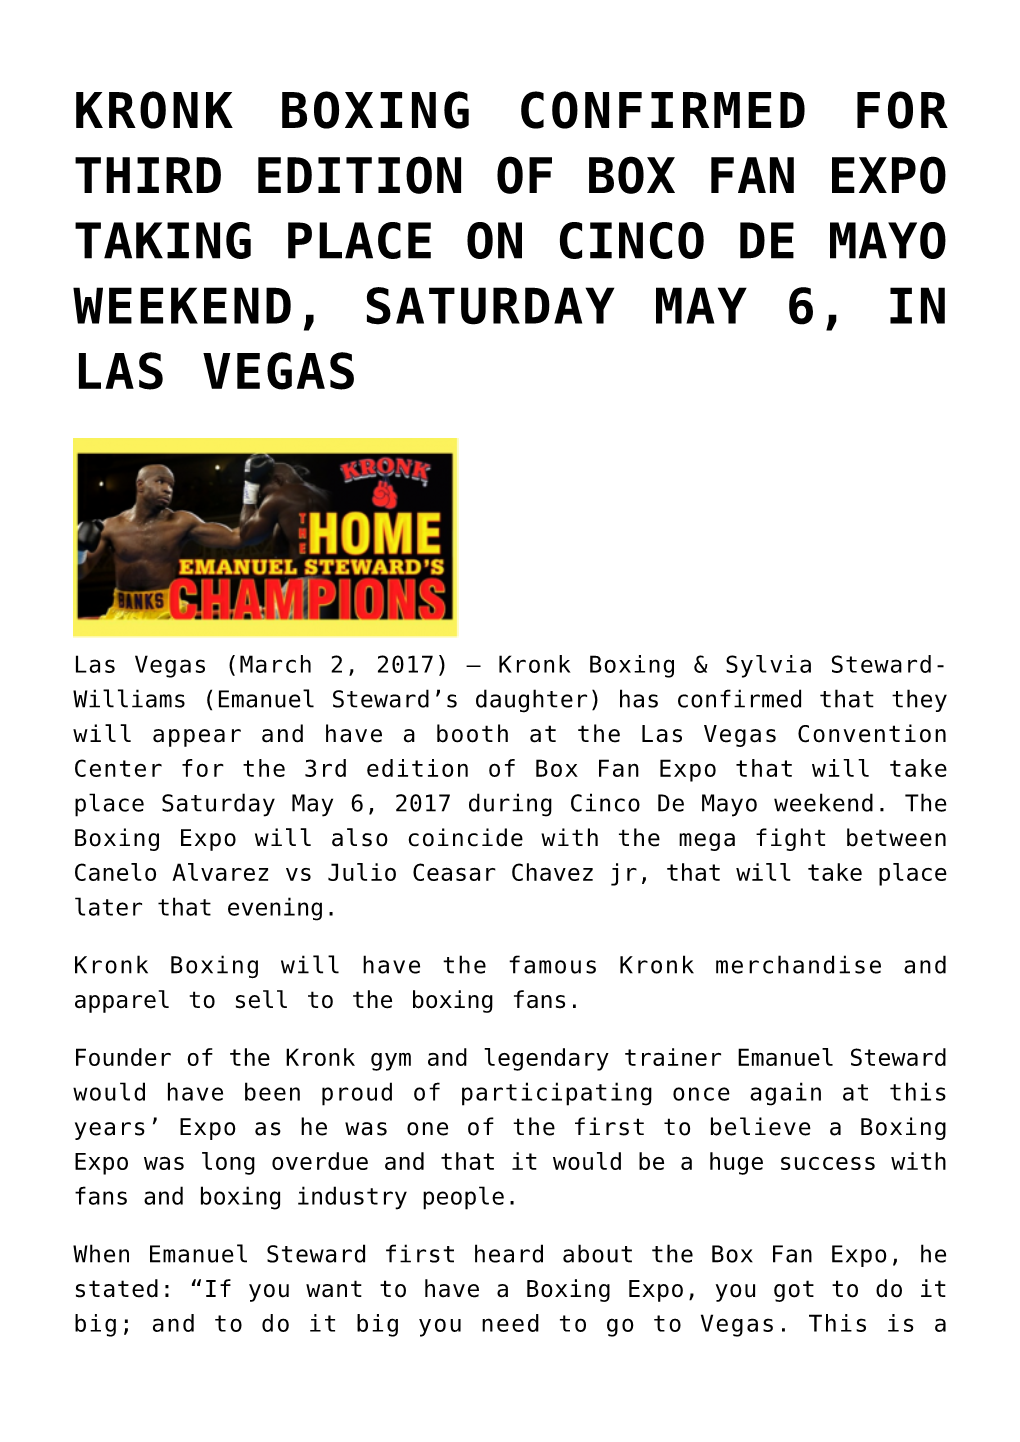 Kronk Boxing Confirmed for Third Edition of Box Fan Expo Taking Place on Cinco De Mayo Weekend, Saturday May 6, in Las Vegas